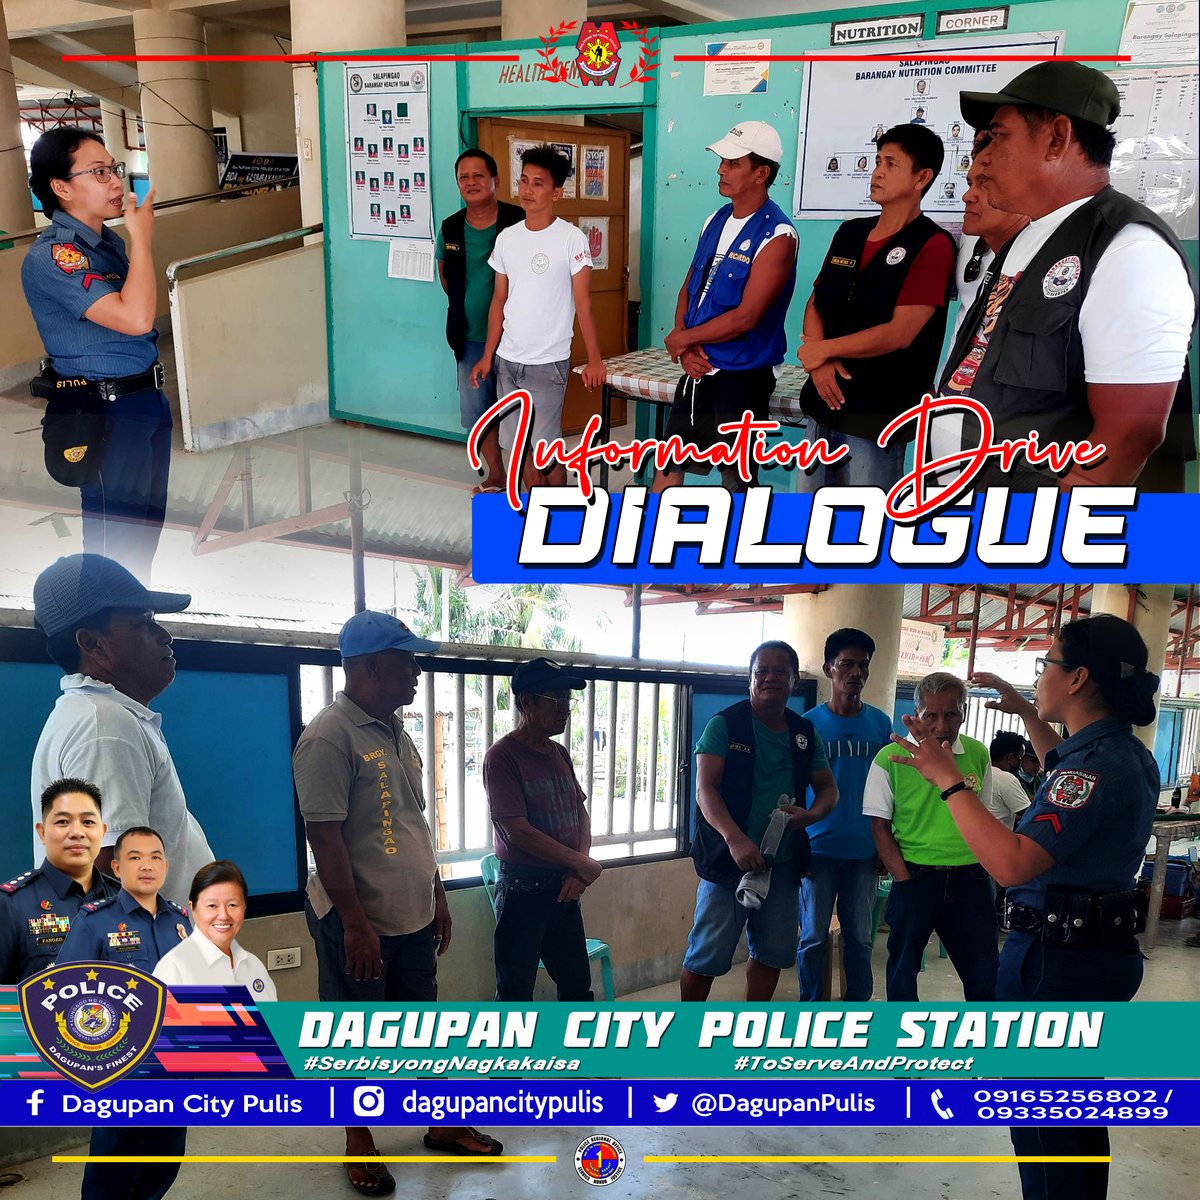 Dagupan CPS personnel under the supervision of PLTCOL BRENDON B PALISOC, OIC, conducted brgy. visitation and short dialogue with the BPATS at Brgy. Salapingao, Dagupan City. #SerbisyongNagkakaisa #ToServeandProtect #PCADGIlocosRegion